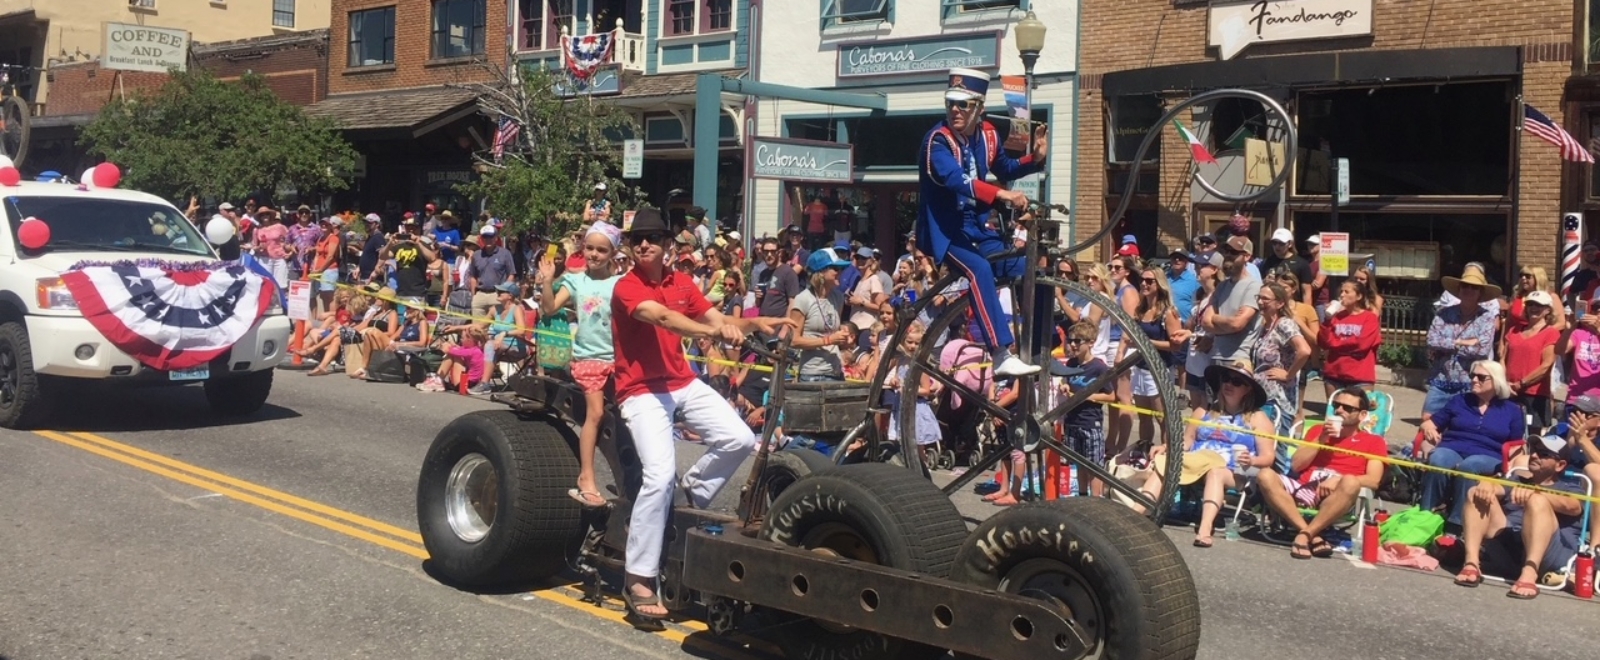 4th of July Parade & Activities - Still Time to Enter - Deadline July 2nd!